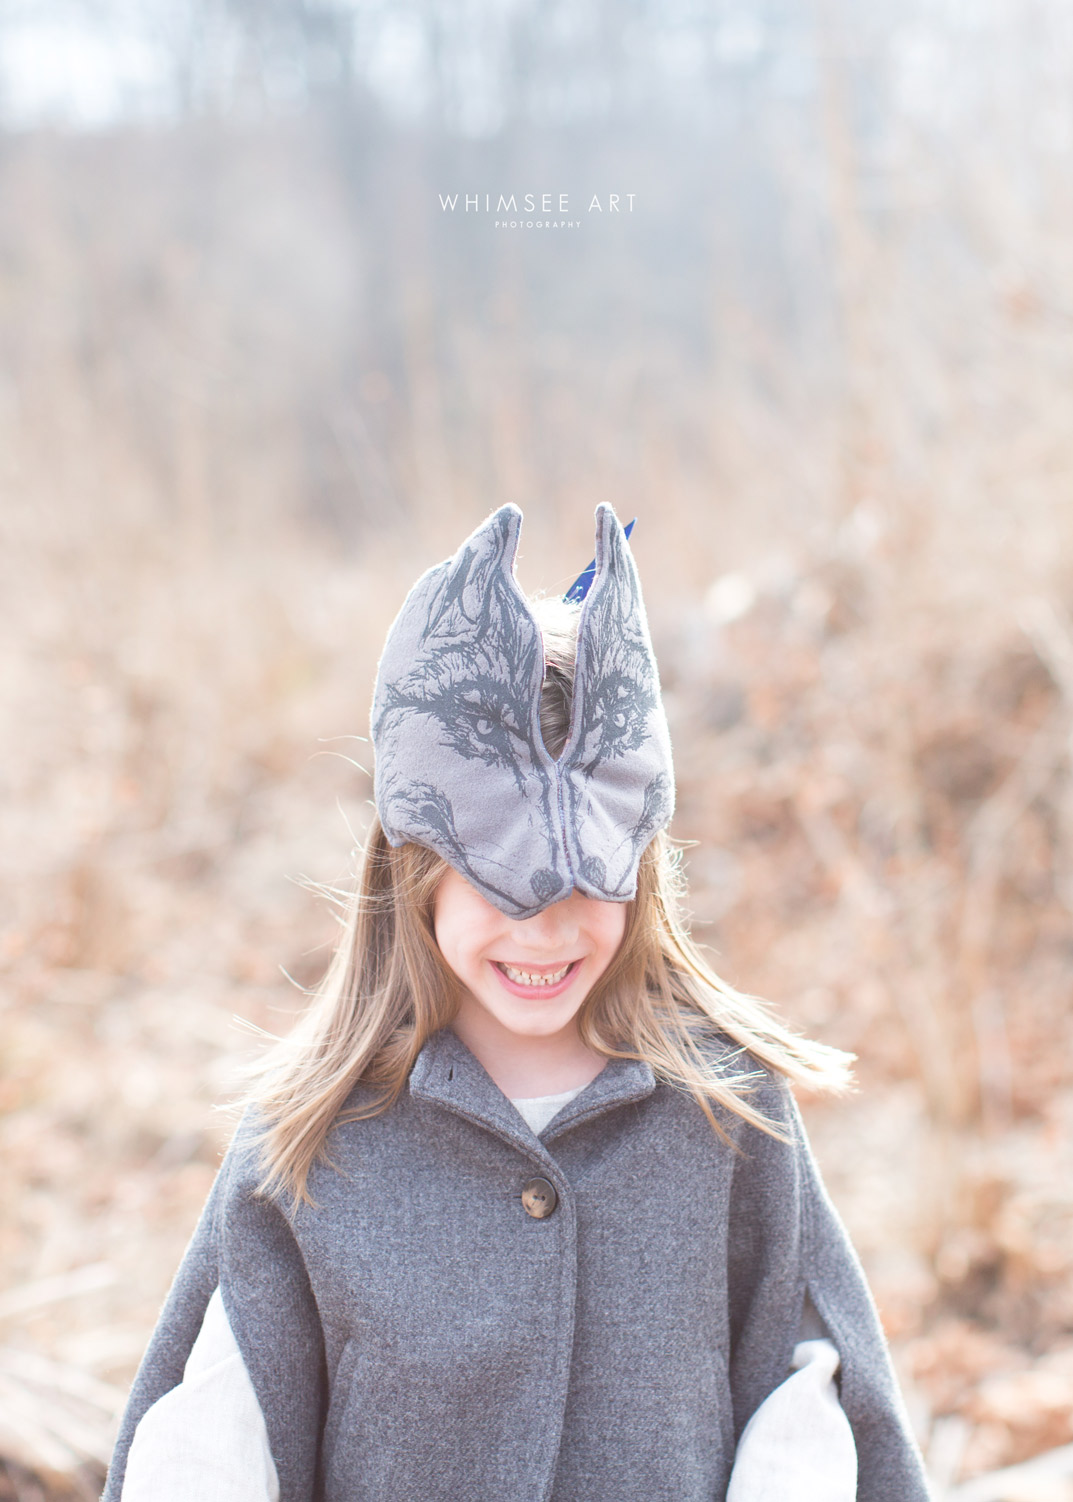 Styled Shoot With Animalesque | Roanoke Child Photographer | Whimsee Art Photography